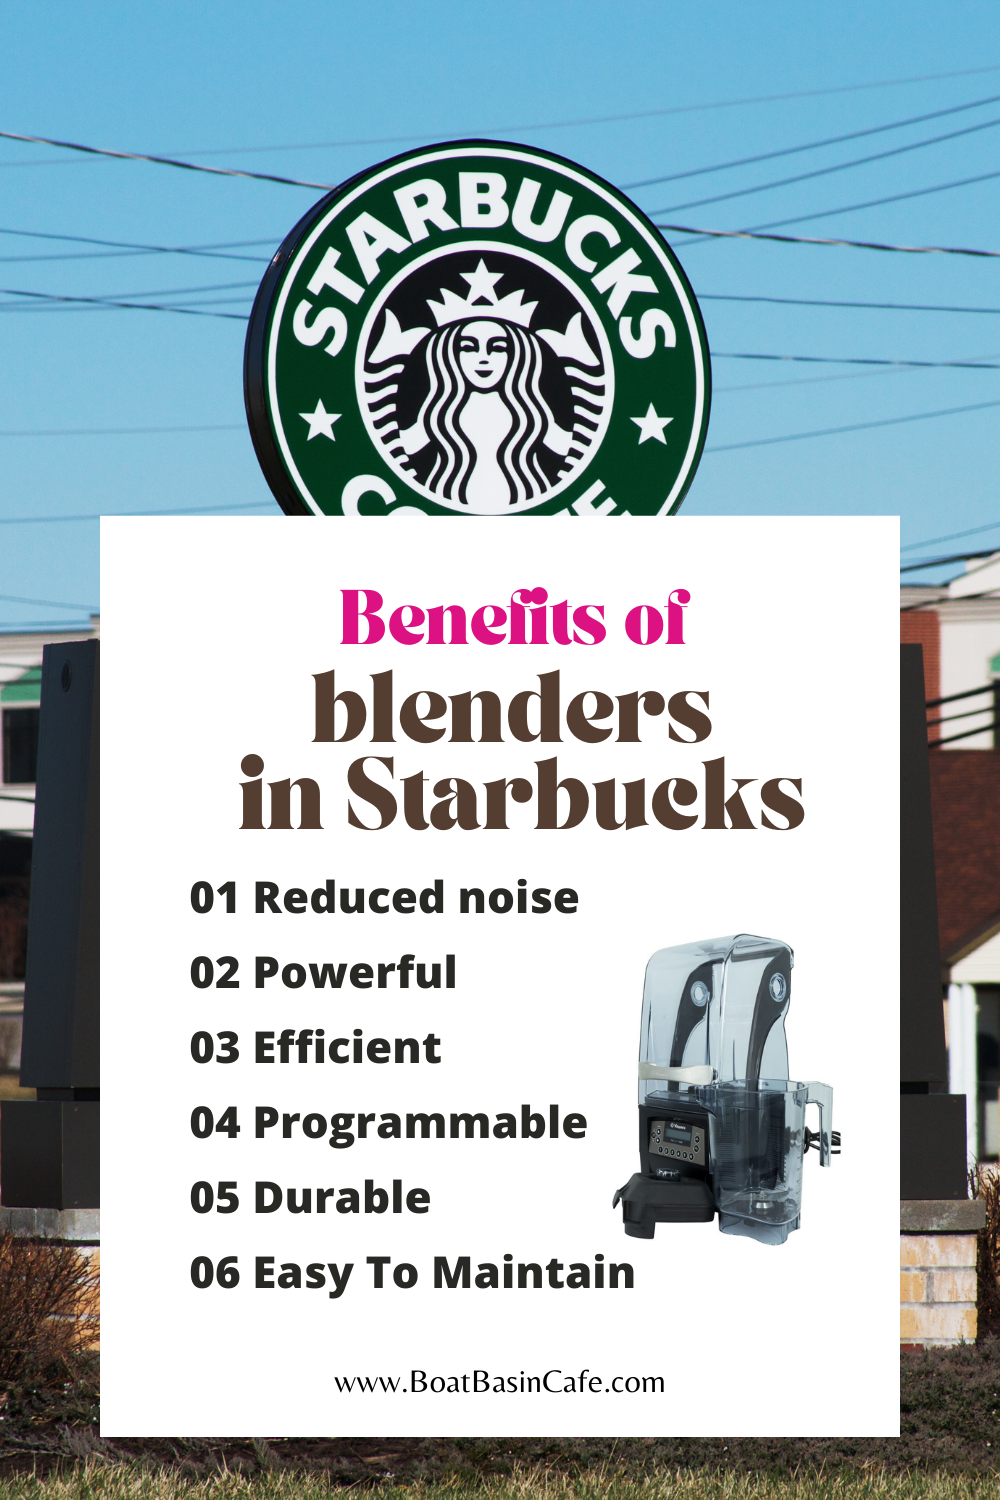 Which Is The Starbucks Blender Of Choice?